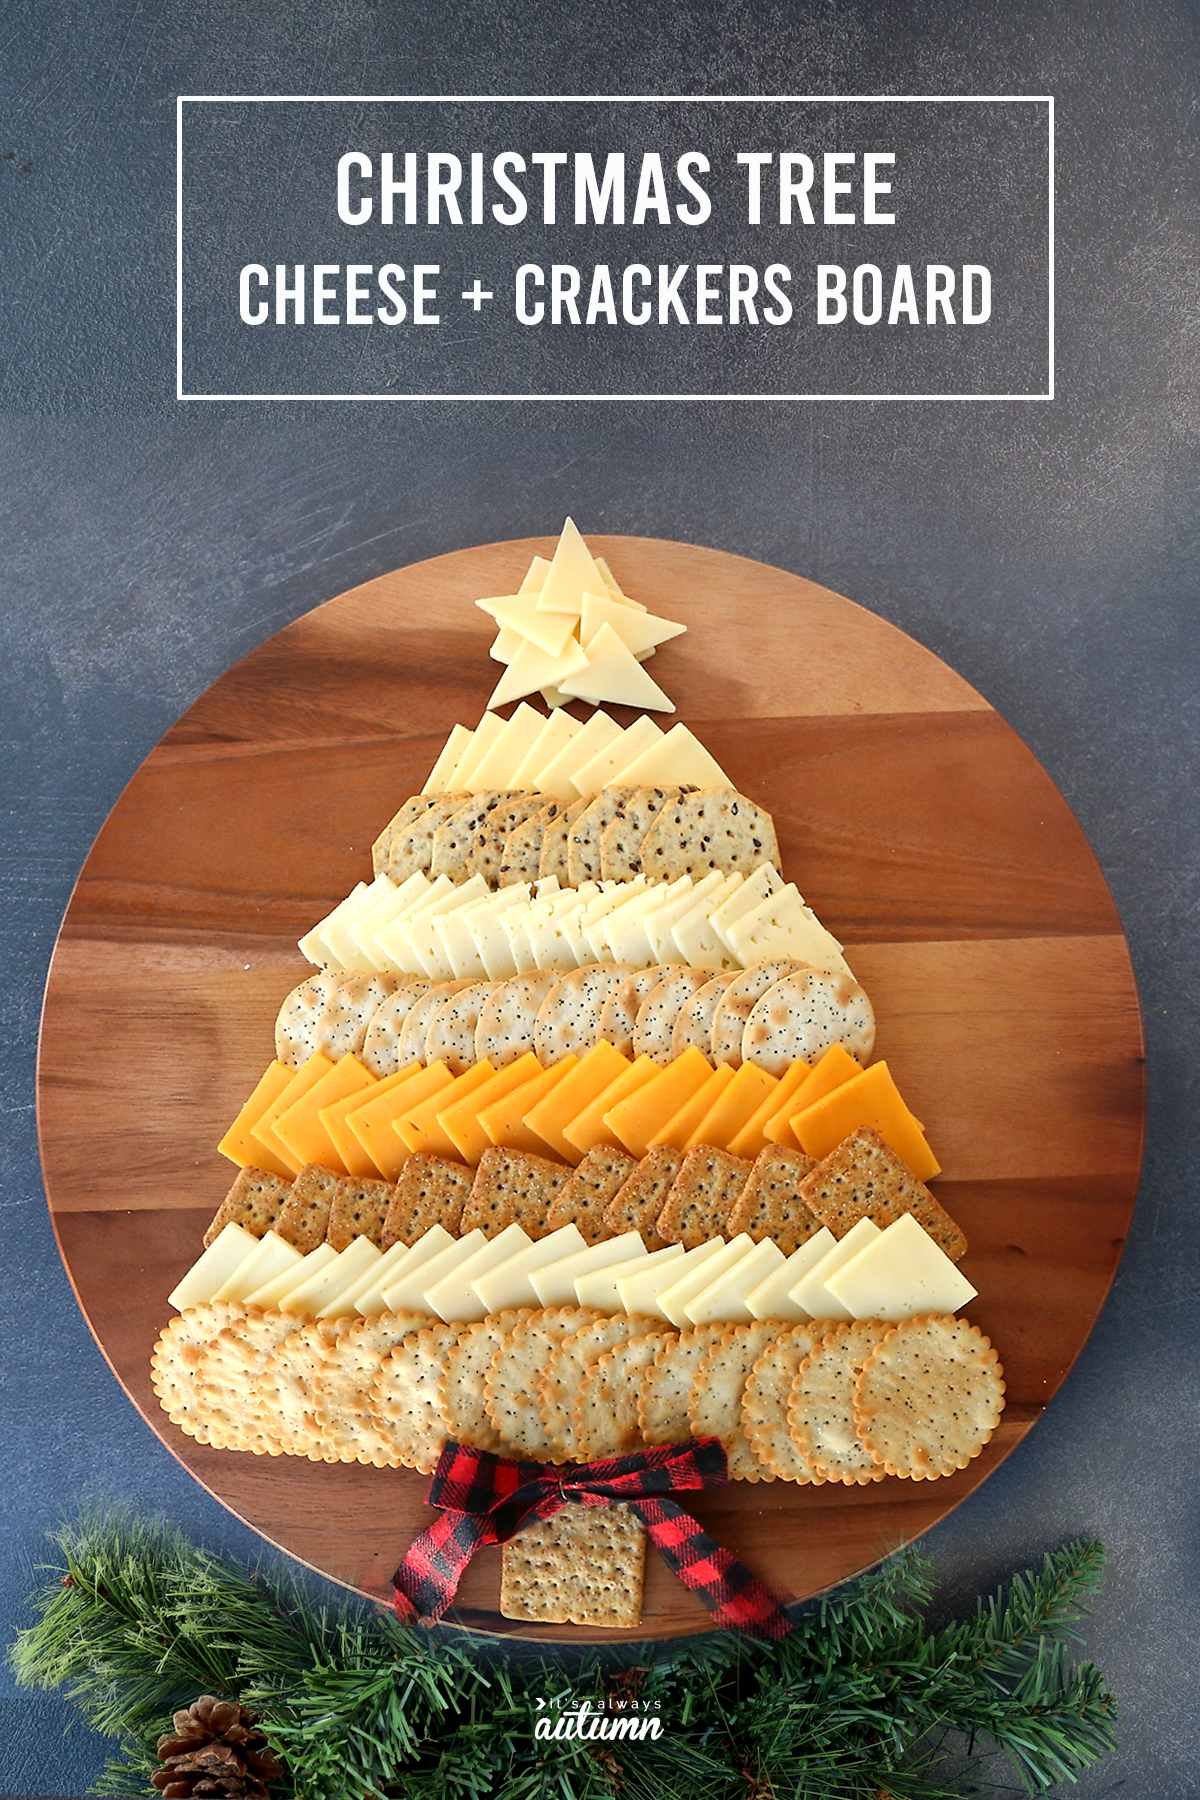 Cheese and crackers in the shape of a Christmas tree on a wood tray